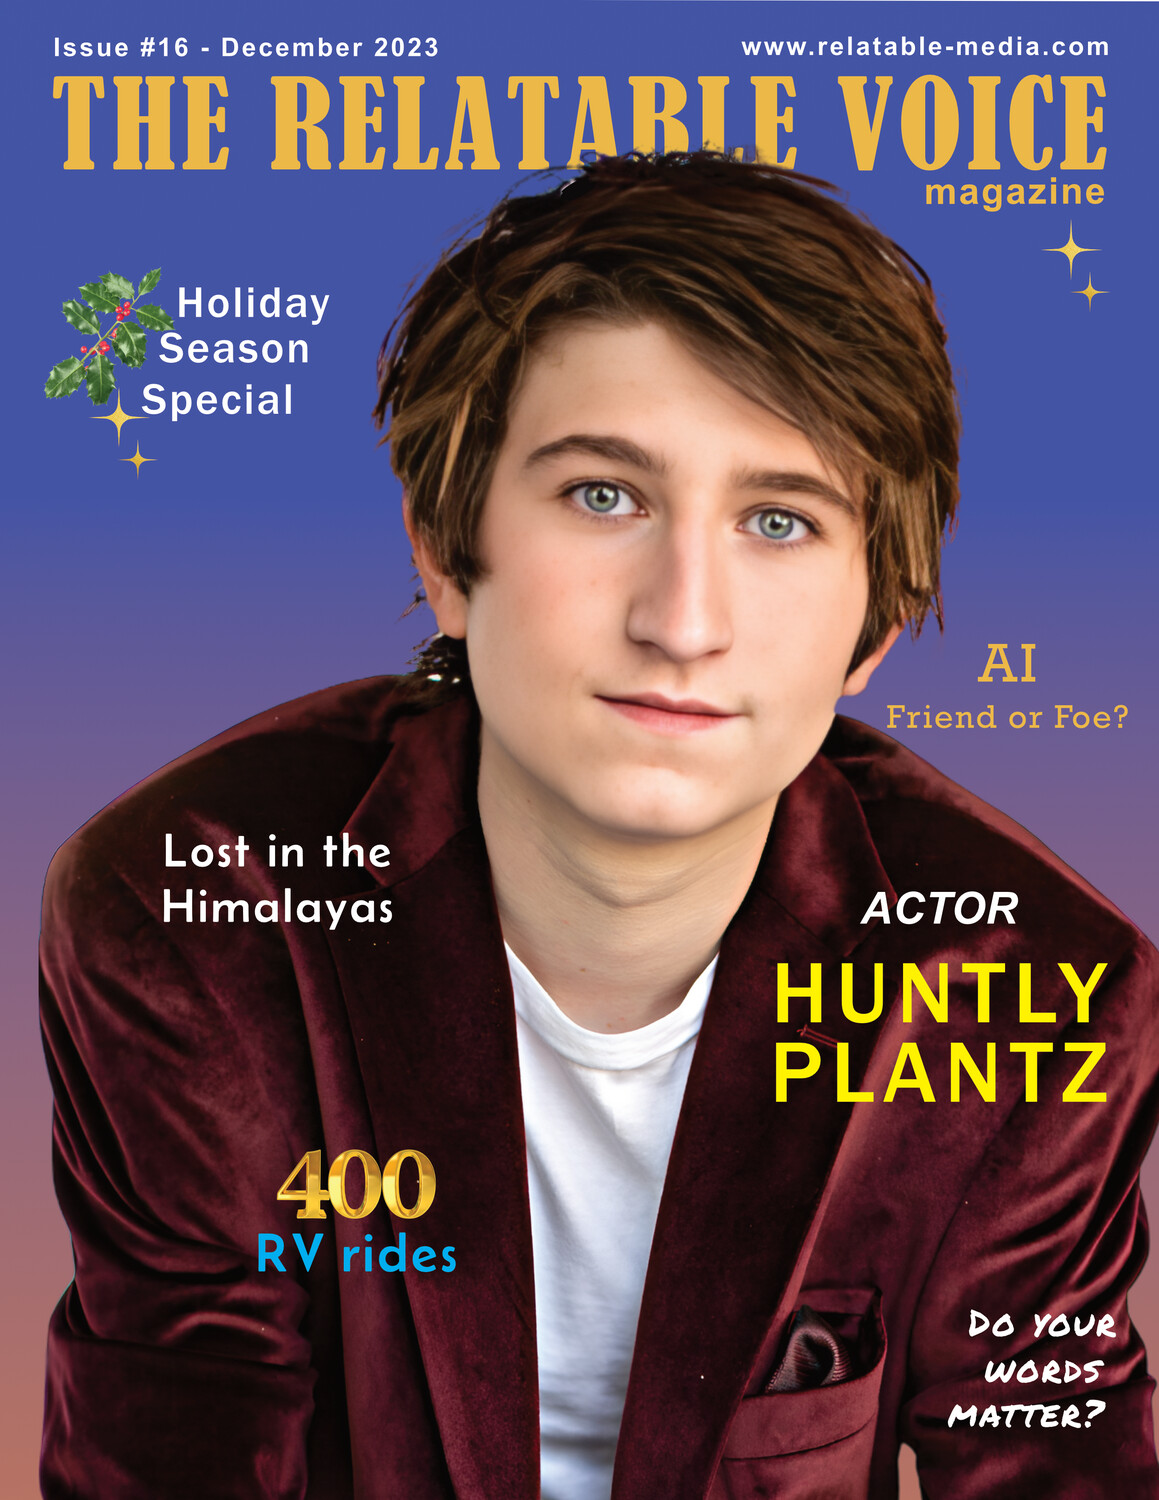 The Relatable Voice Magazine - Issue #16 - December 2023